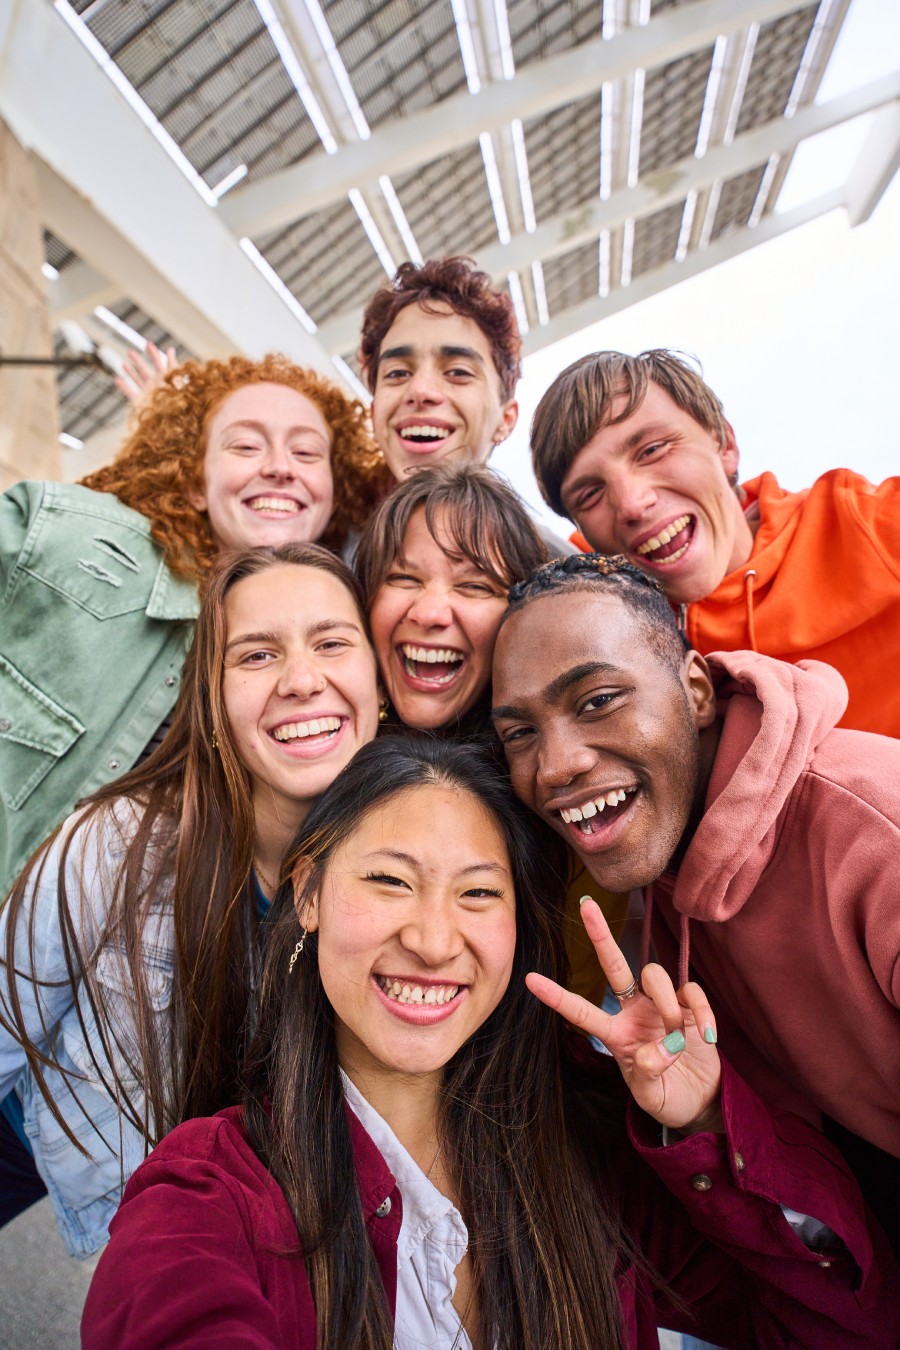 A group photo of young people smiling outside